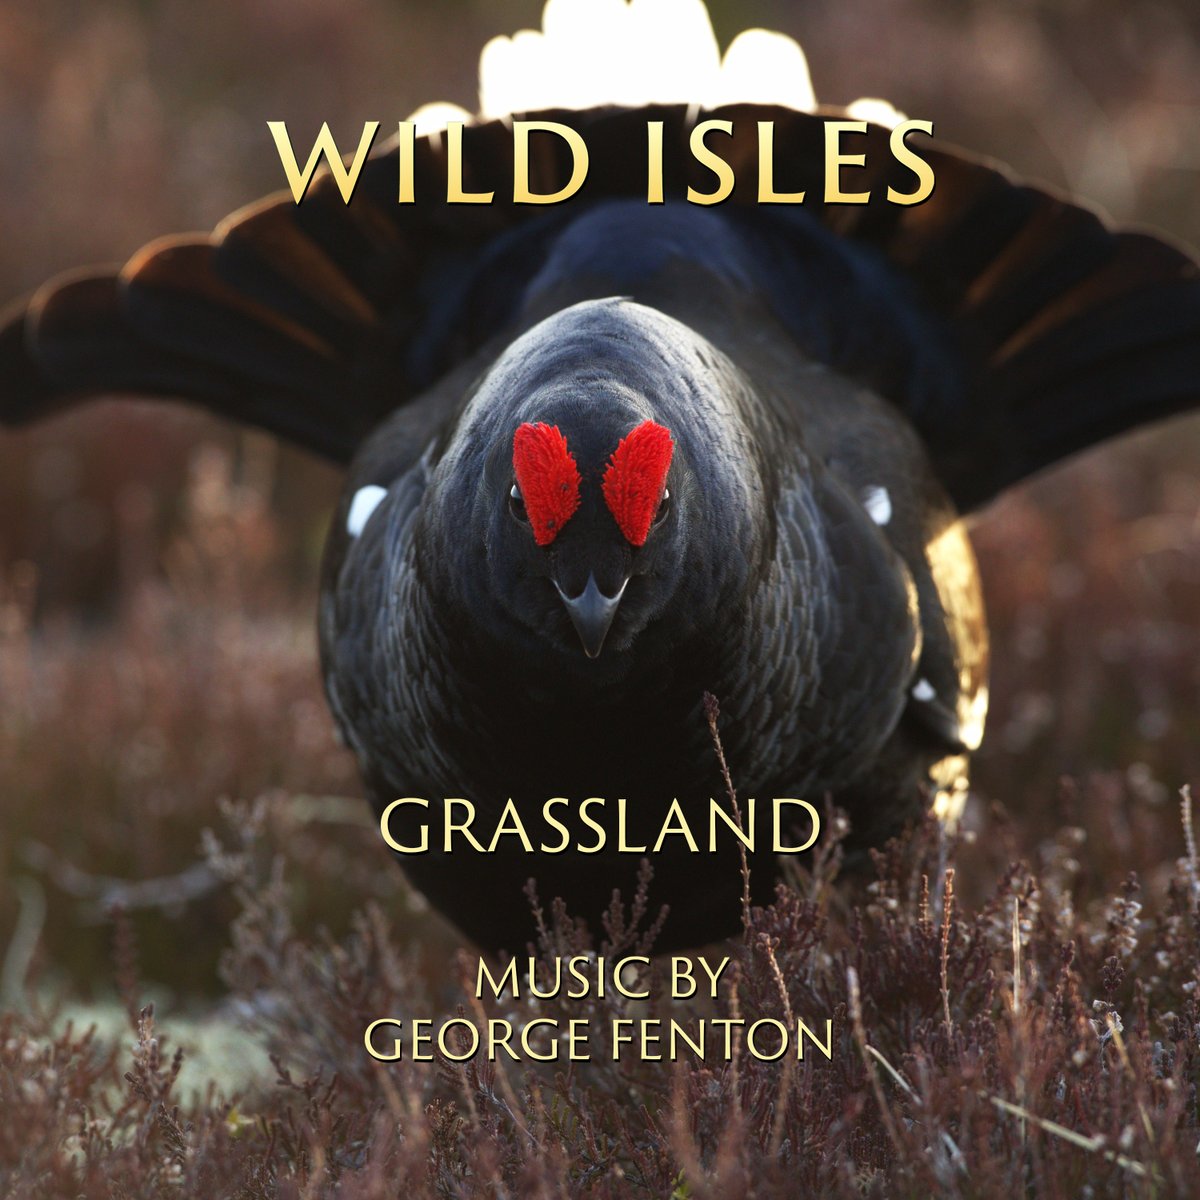 Wild Isles - Grassland on Sunday. With several of my favourite sequences - the hen harrier among them ✍️GF